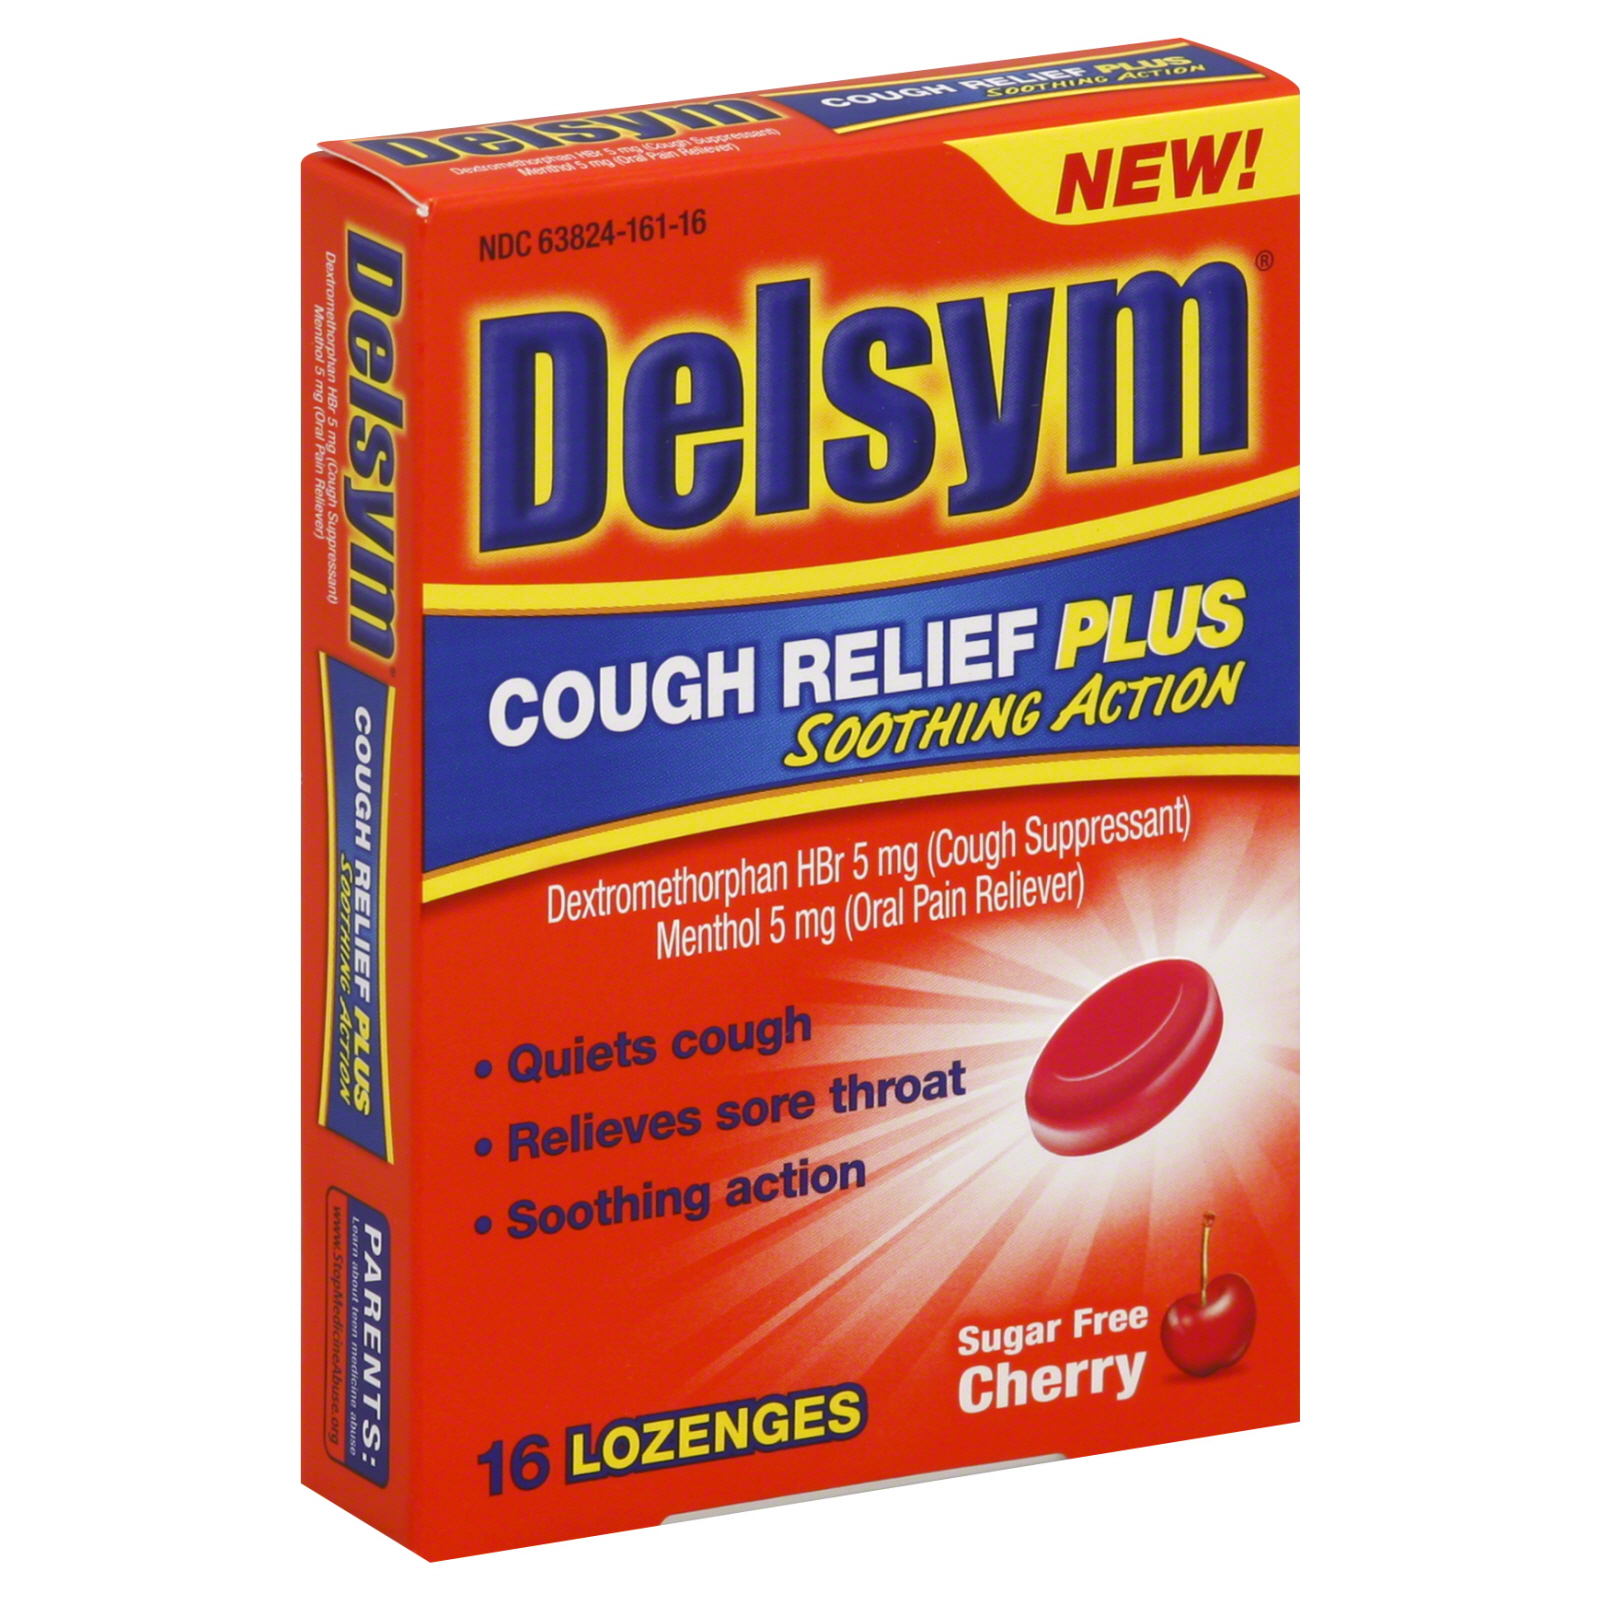 delsym-cough-relief-plus-soothing-action-sugar-free-cherry-16-lozenges